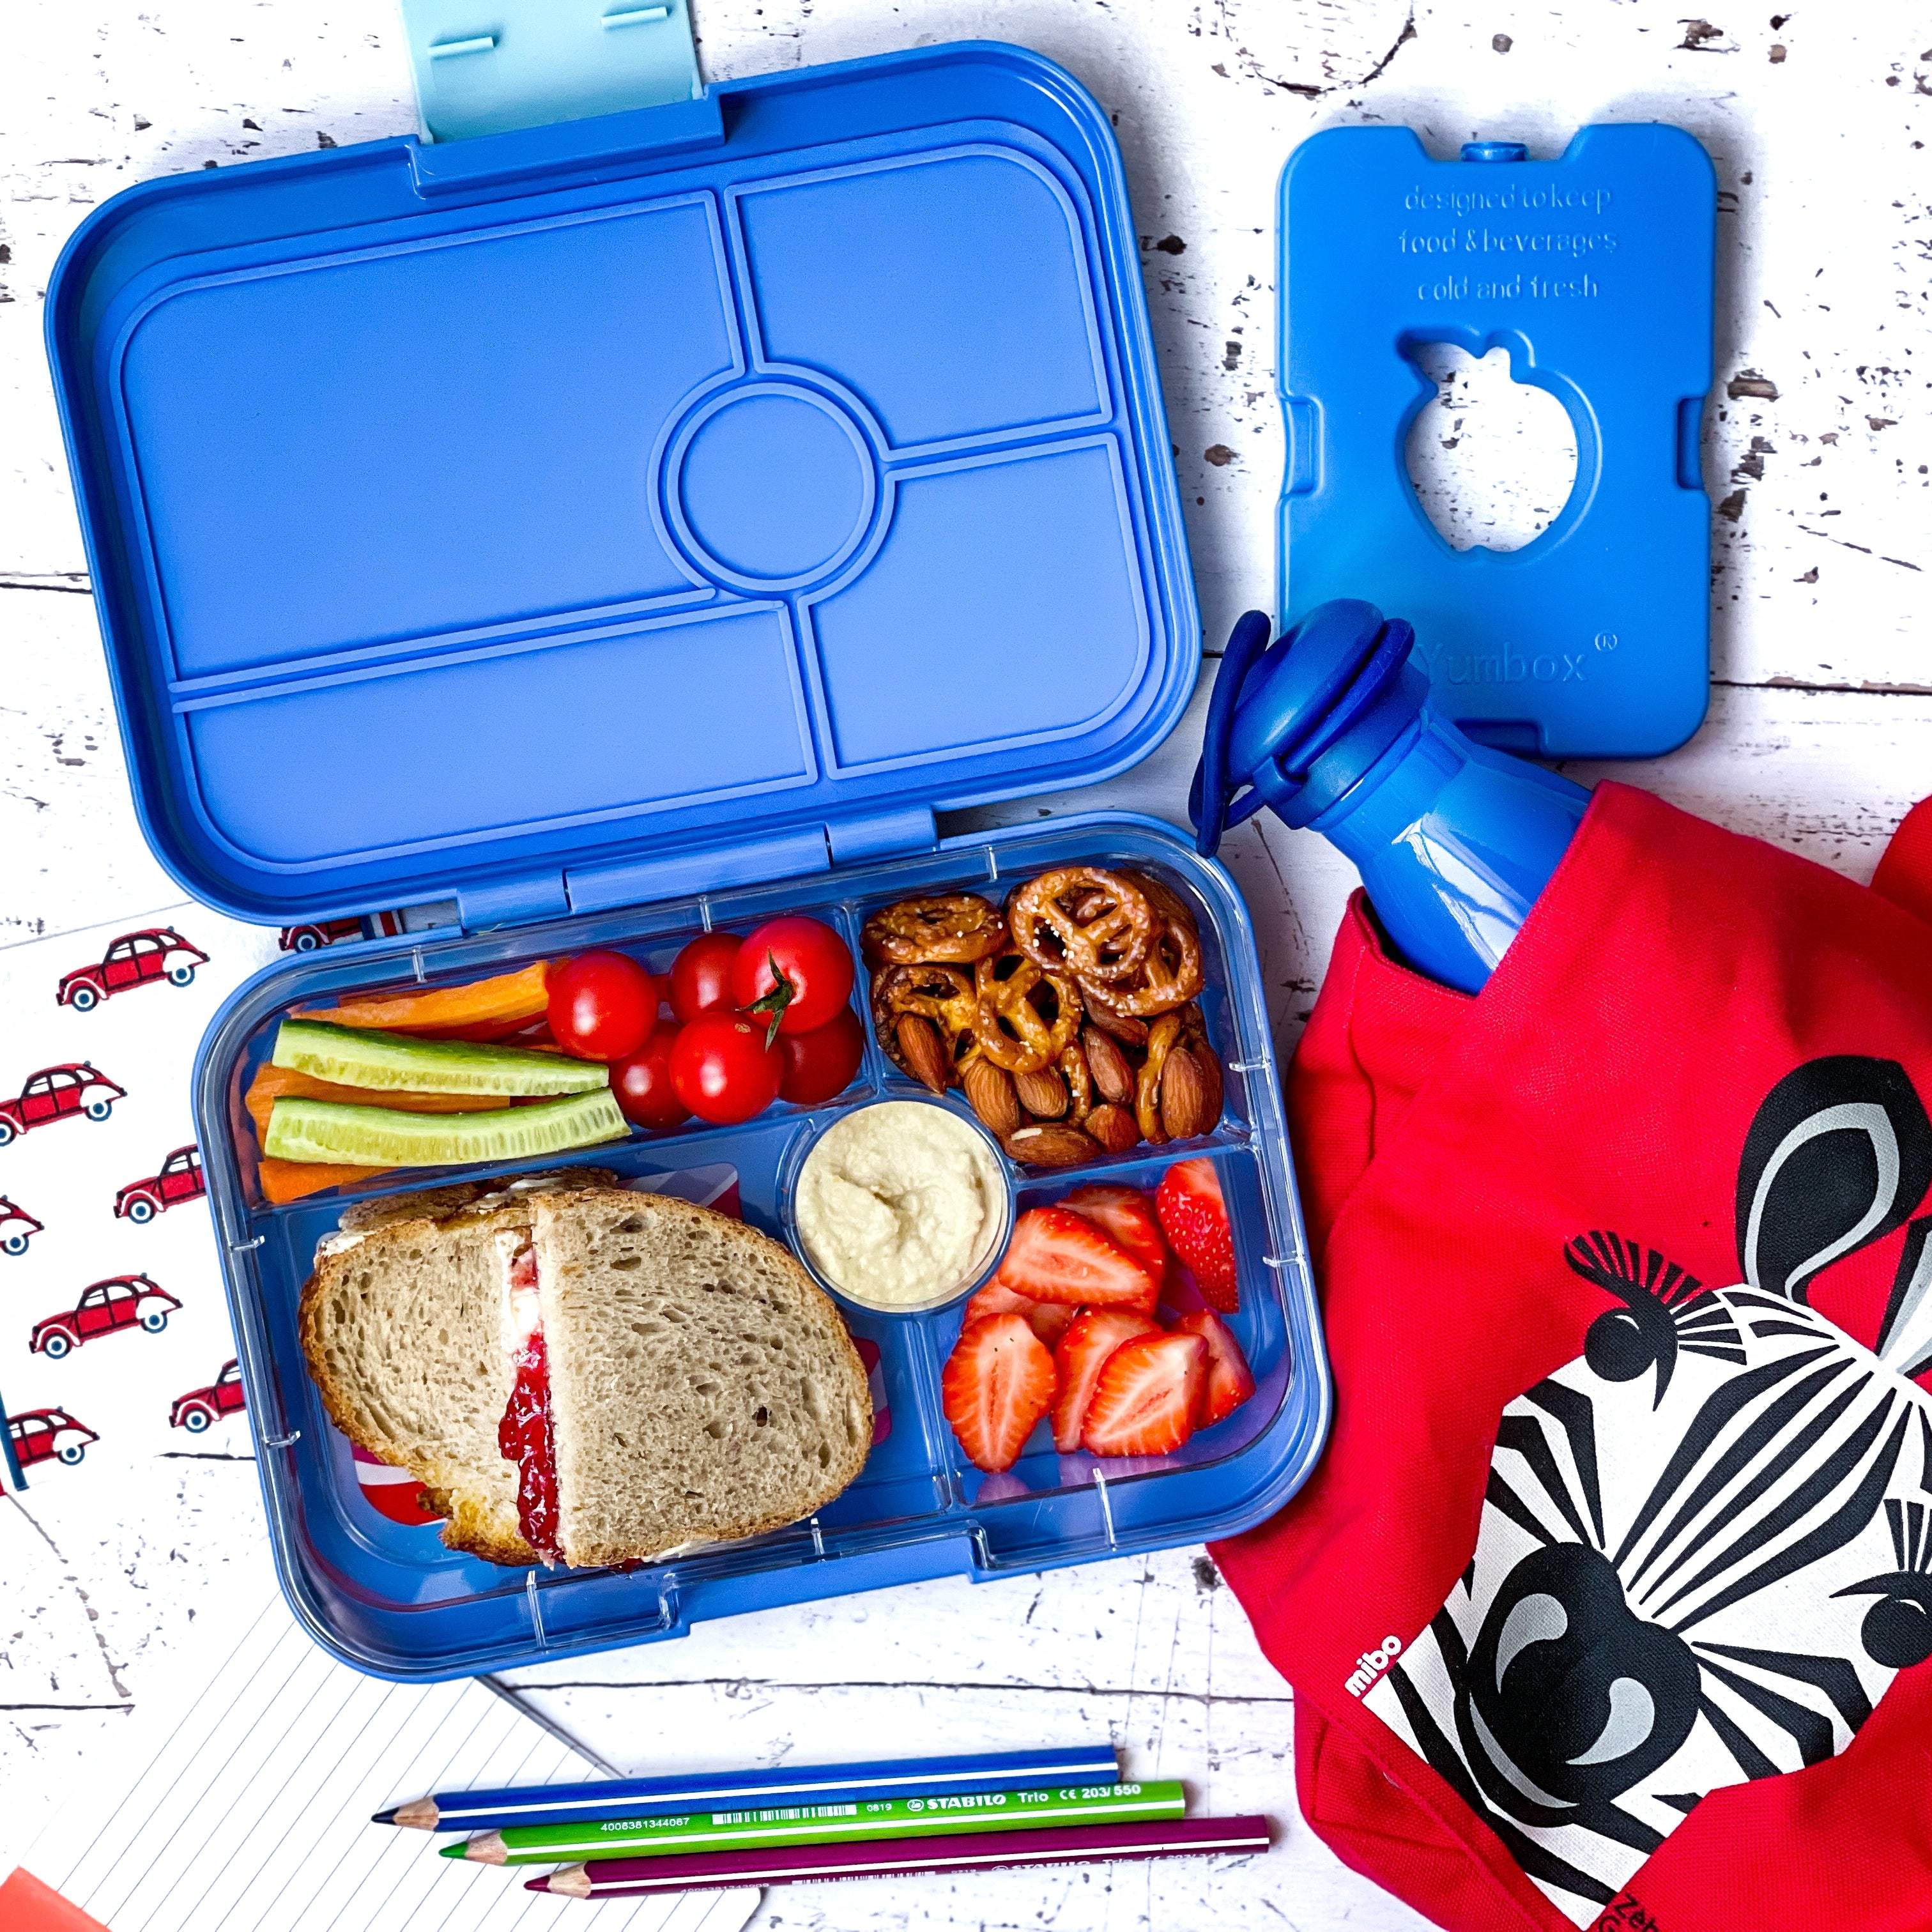 Yumbox Tapas (the largest Yumbox model) are now available for